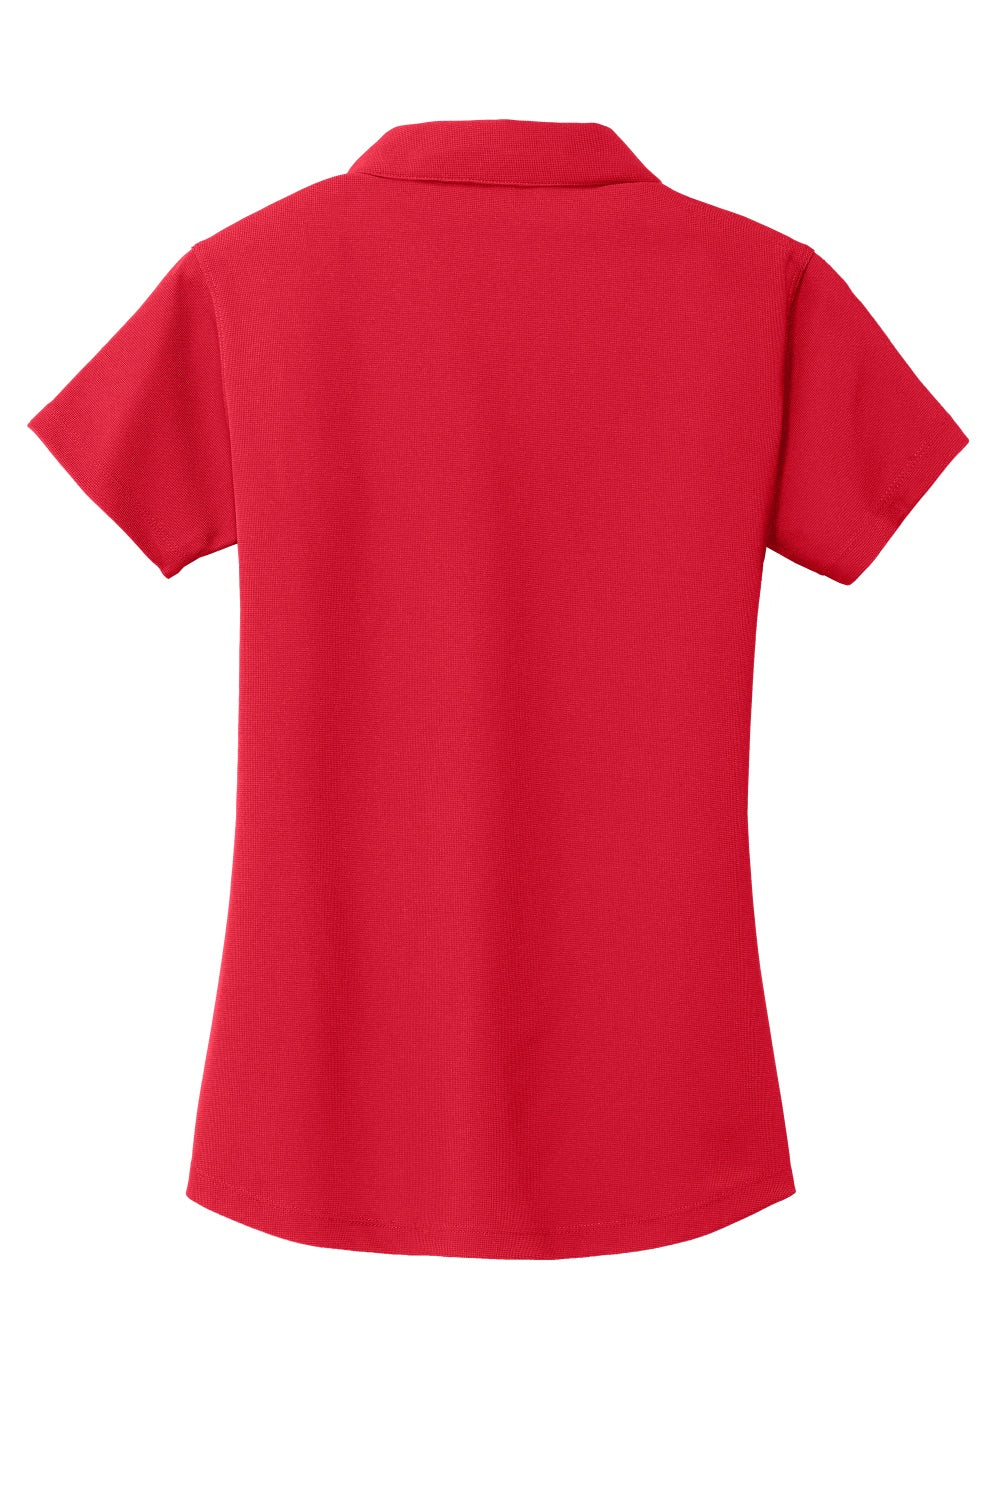 Port Authority L572 Womens Dry Zone Moisture Wicking Short Sleeve Polo Shirt Engine Red Flat Back